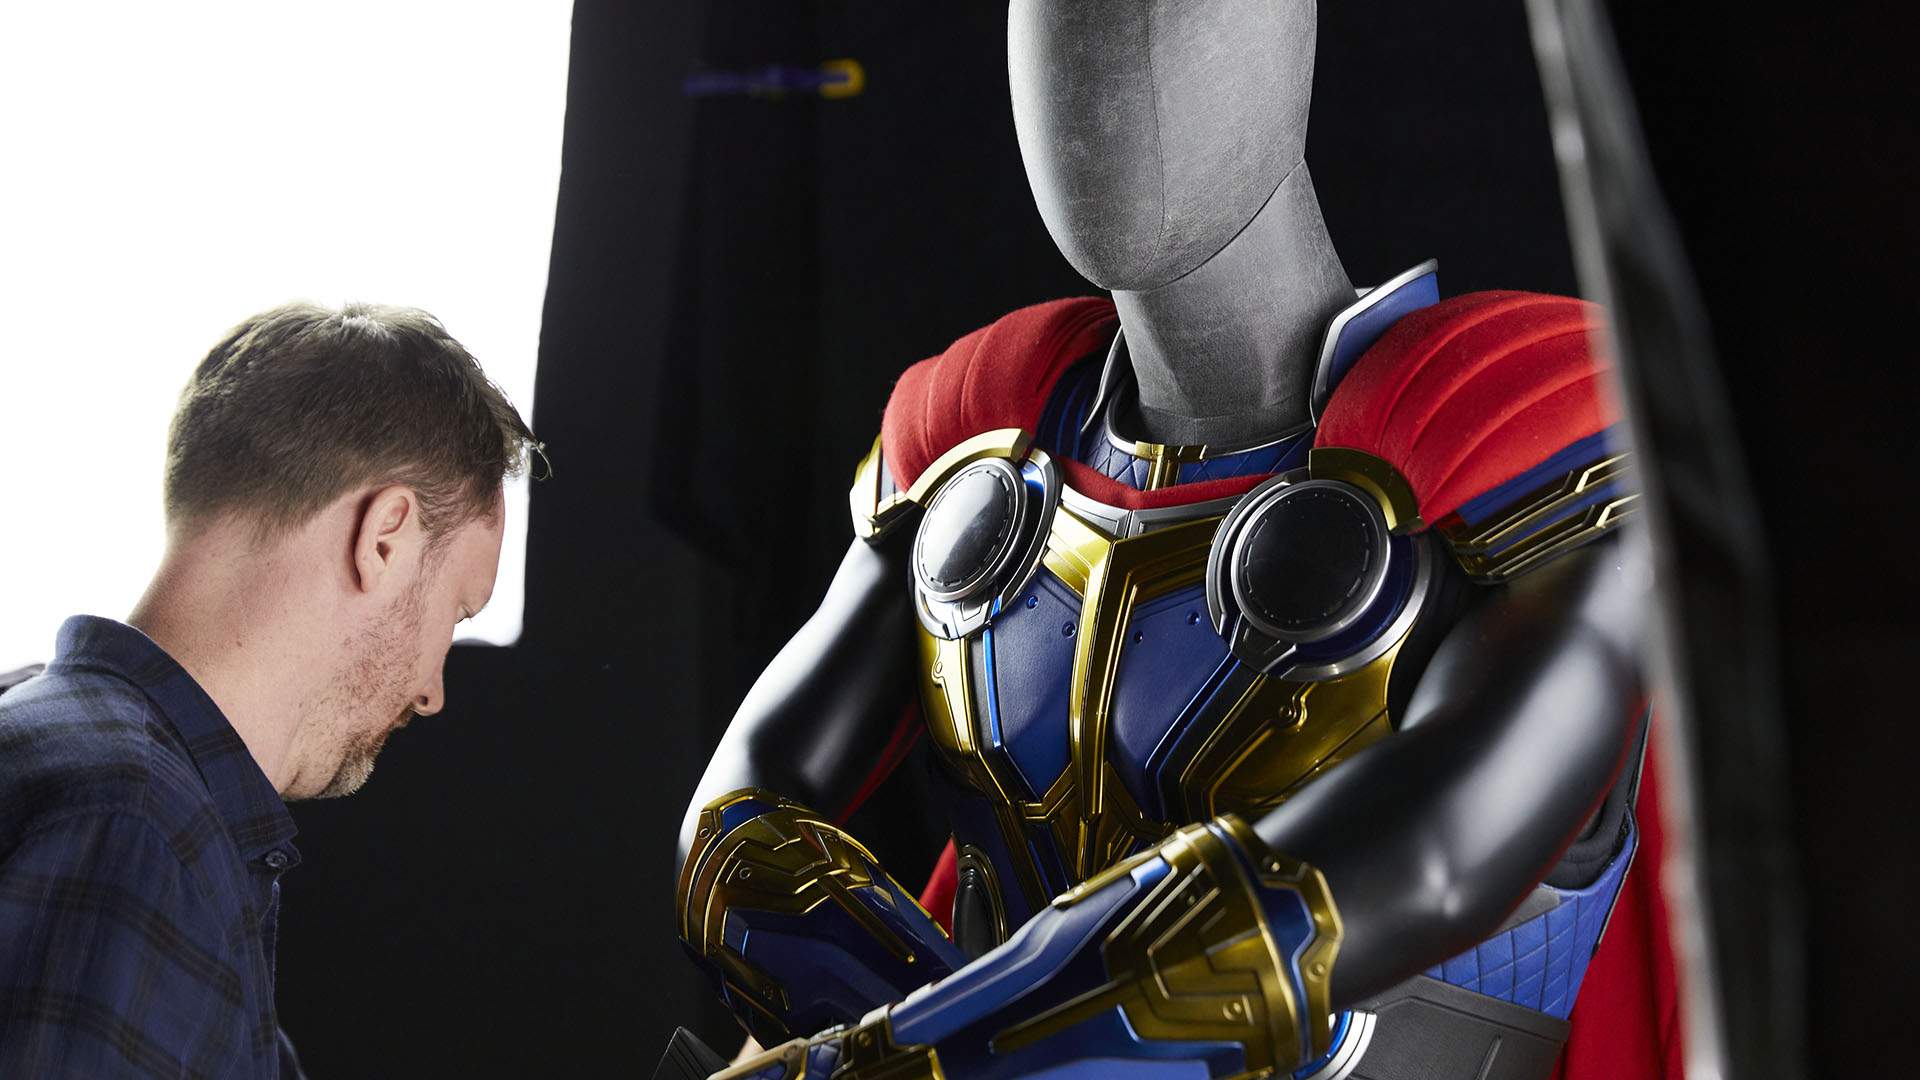 Costumes and Props From 'Thor: Love and Thunder' Are Now on Display at Melbourne's ACMI